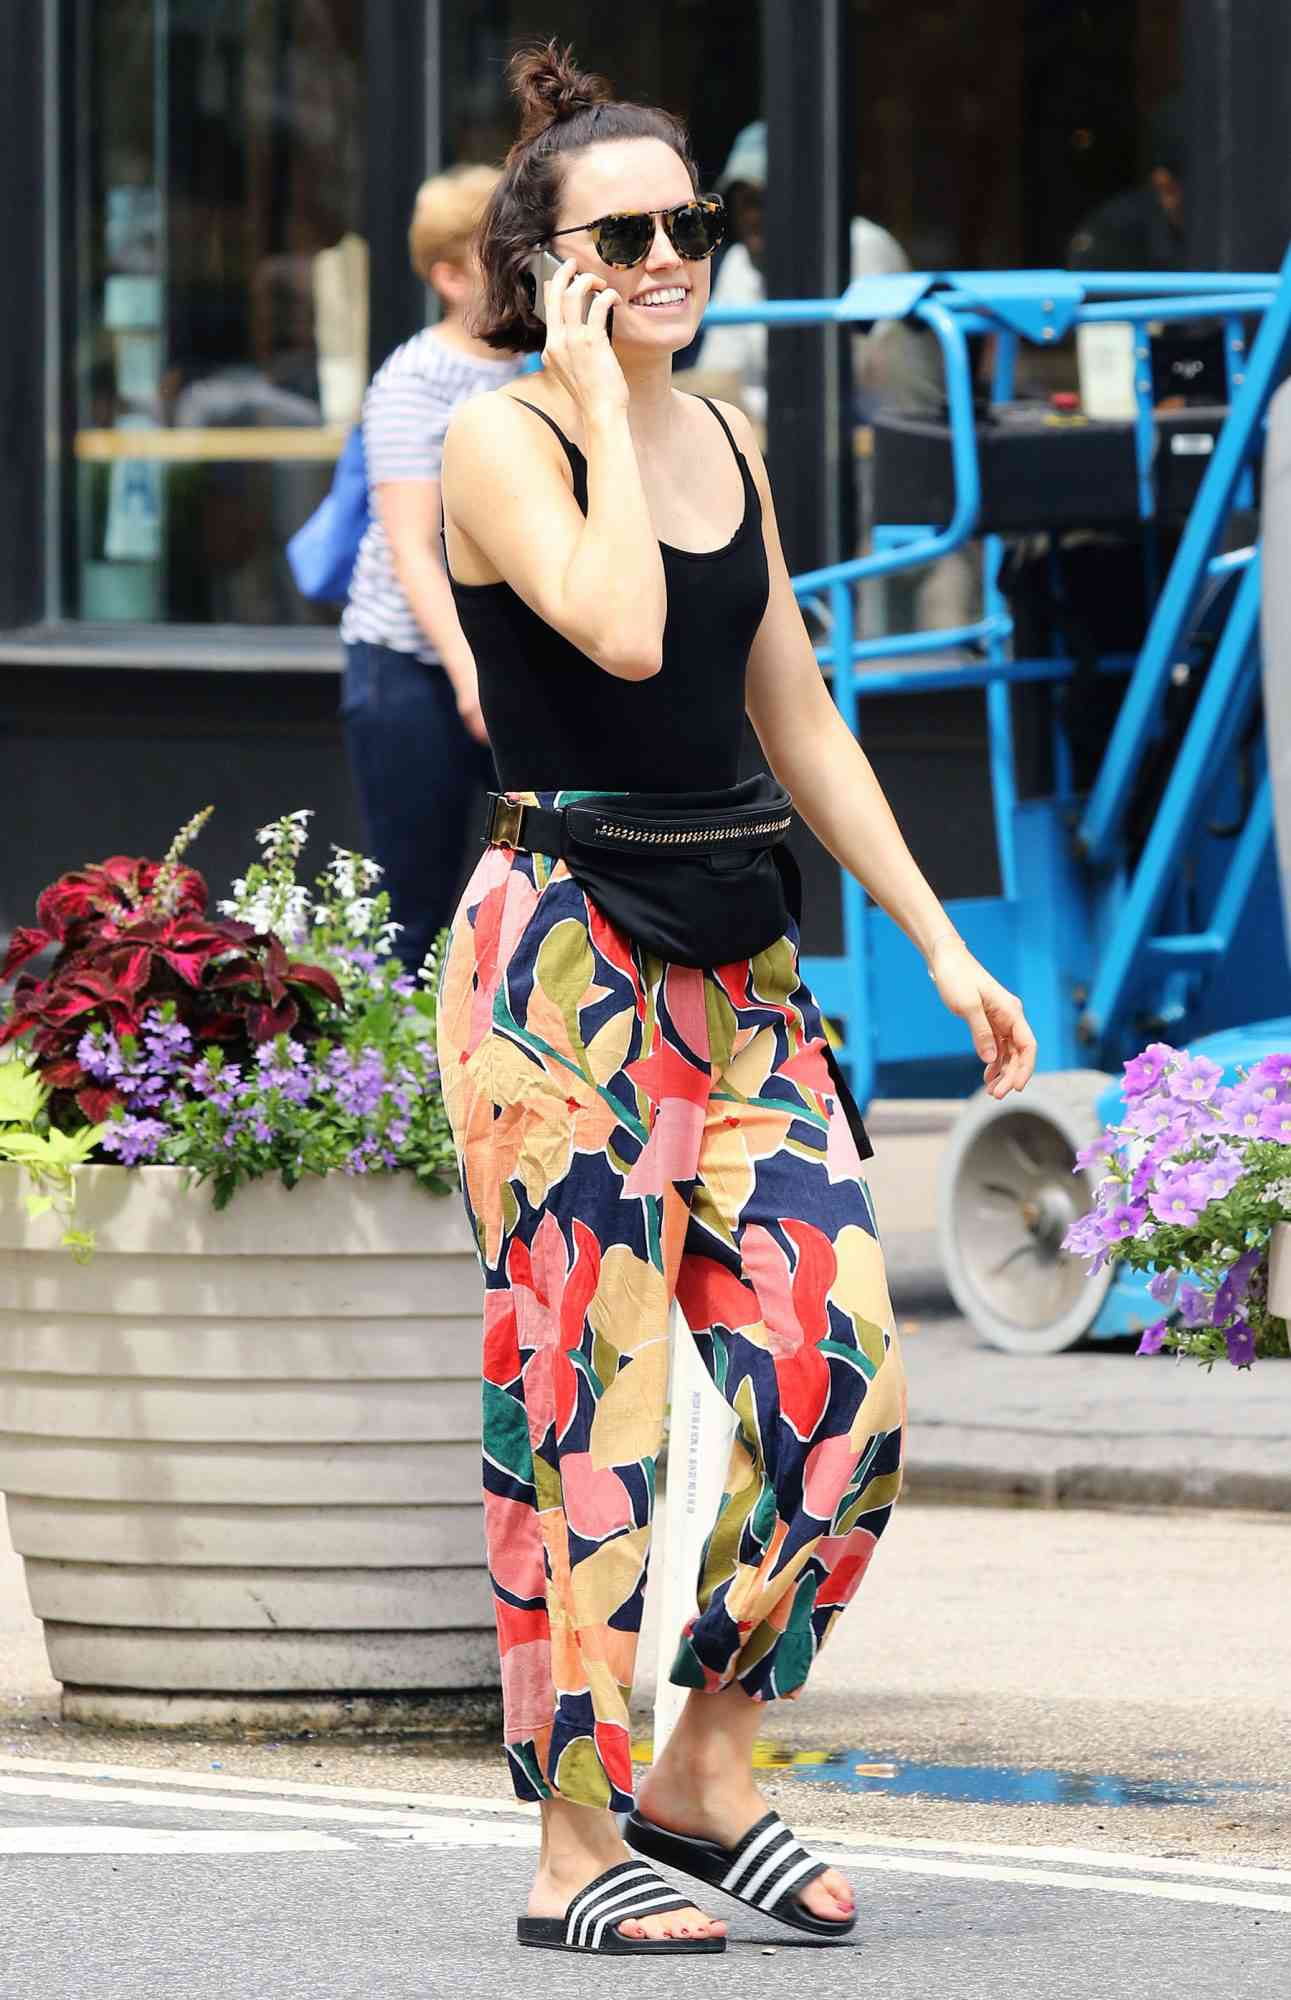 "Star Wars" Star Daisy Ridley Is All Smiles In Colorful Pants, Tank Top, And Flip Flops While Showing Engagement Ring In New York